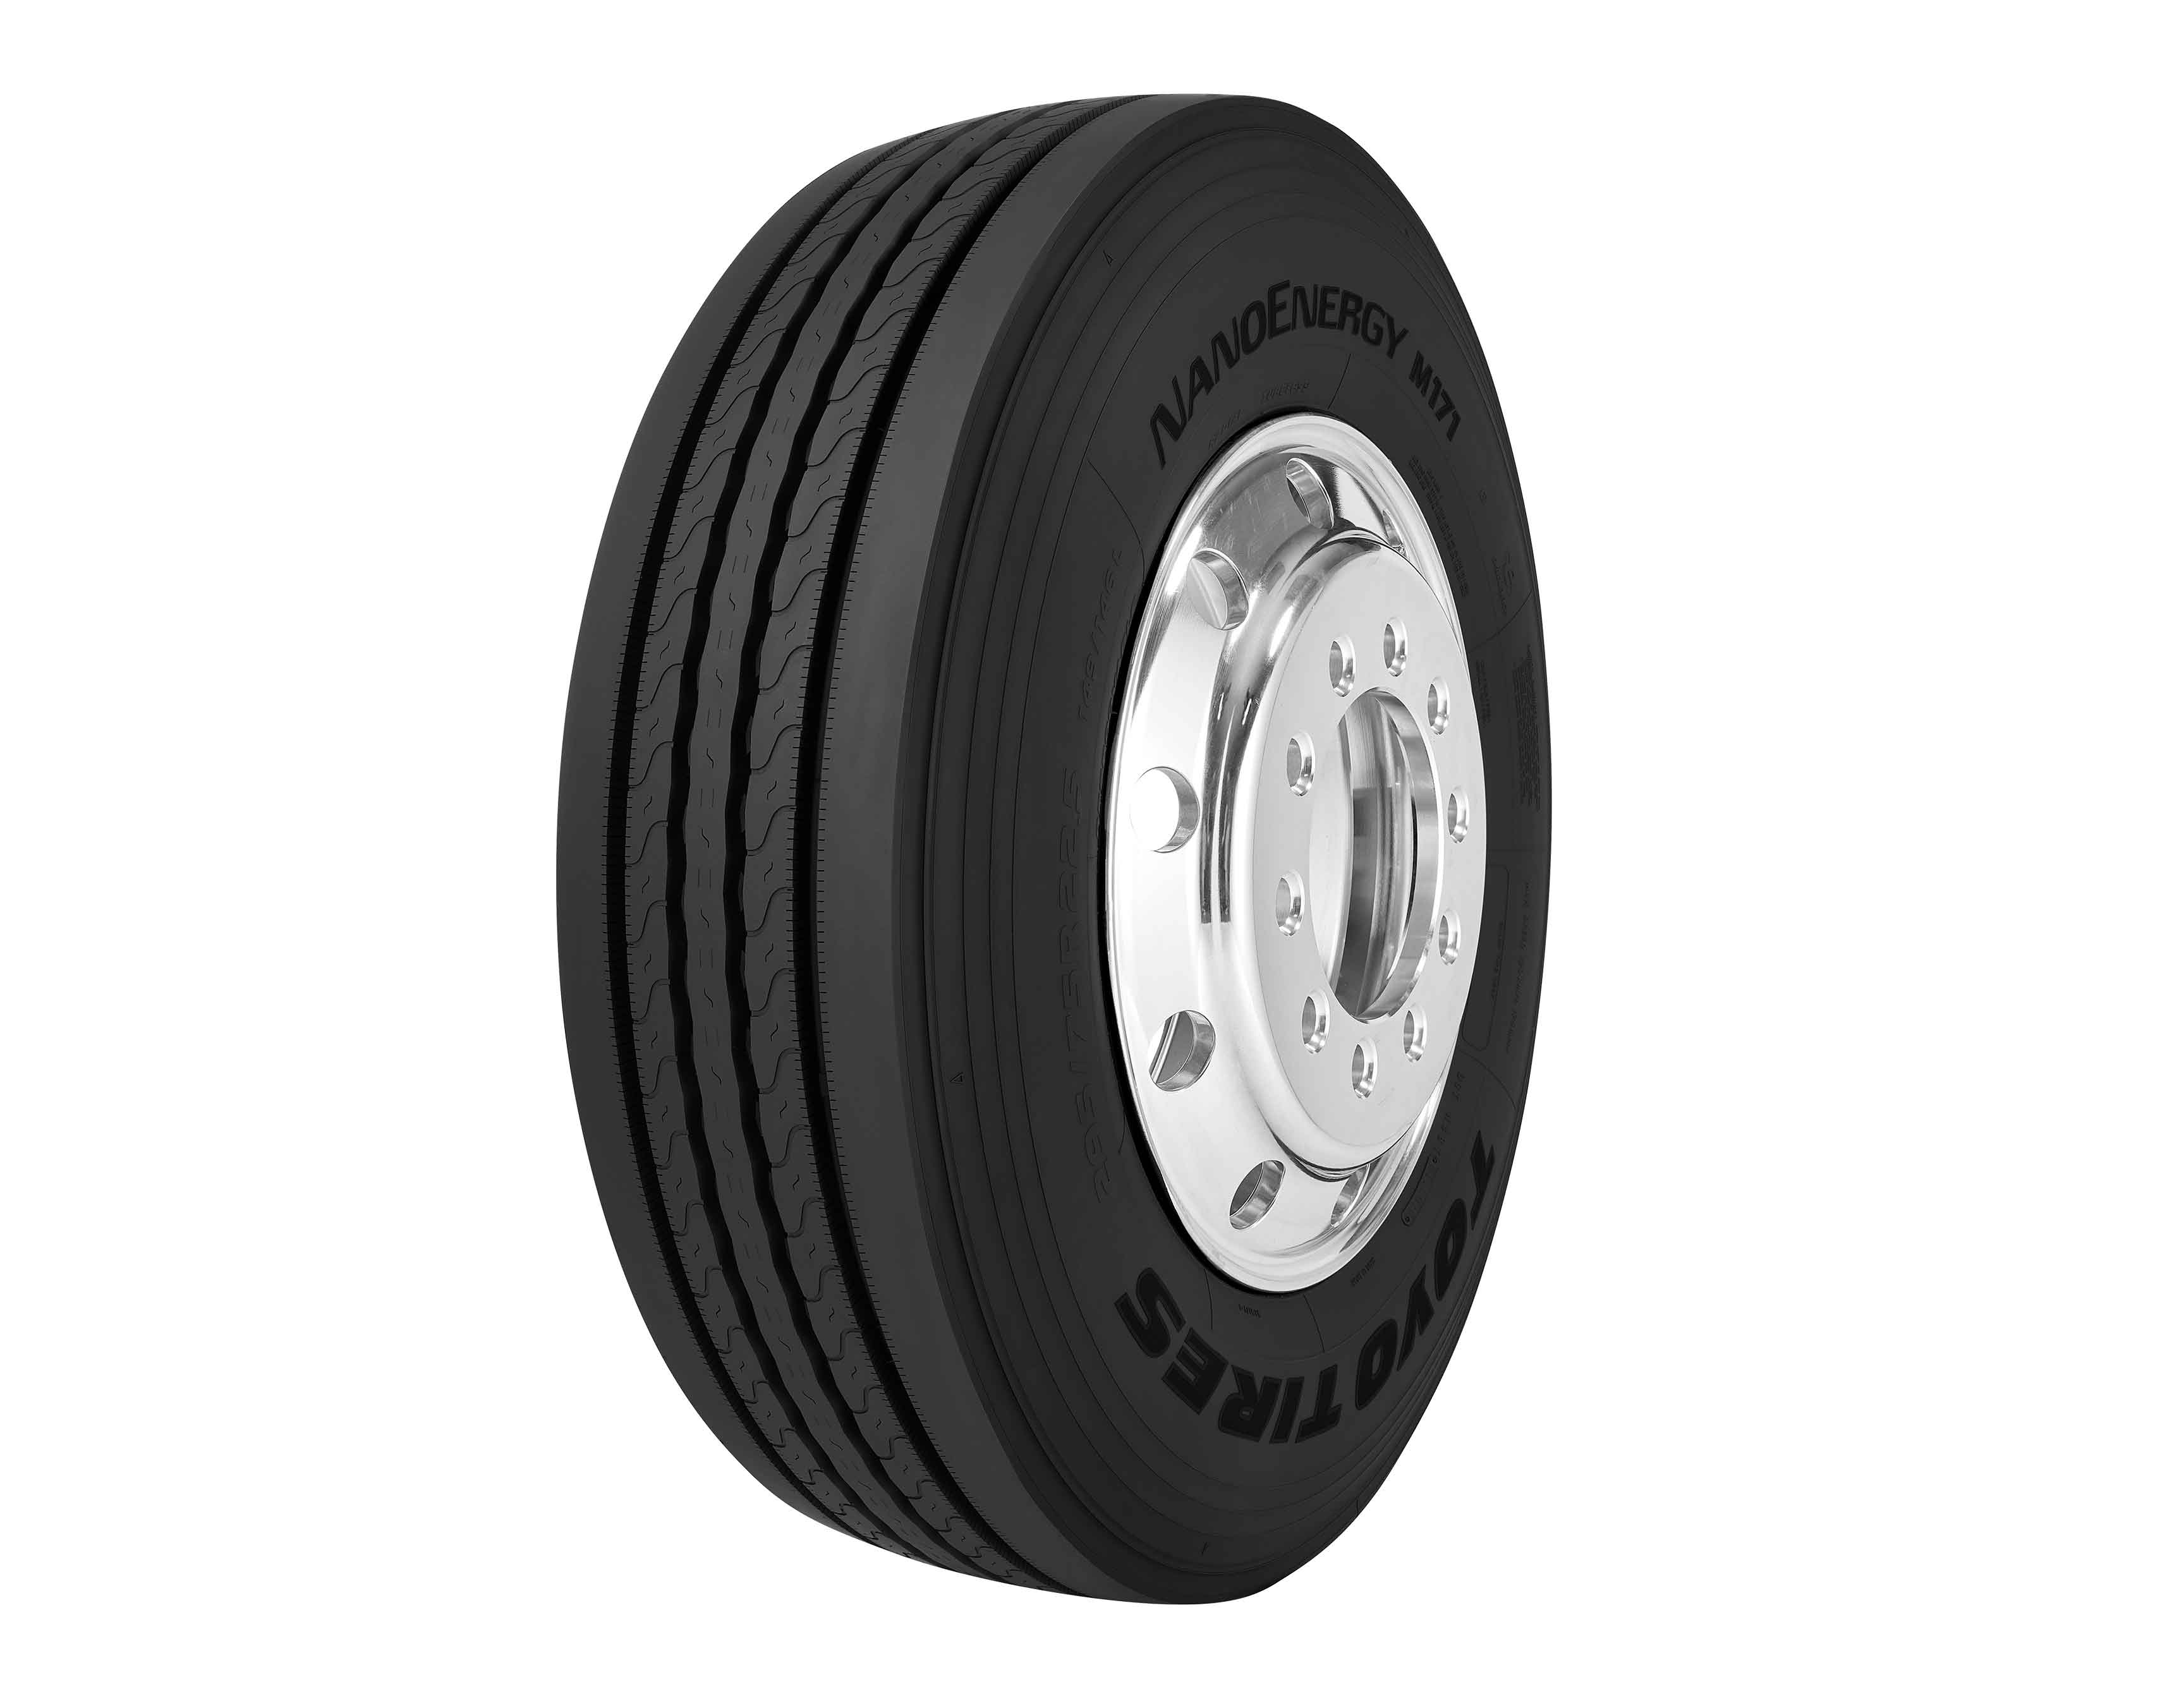 Toyo Tires Introduces the NanoEnergy M171, an All-New All Position Tire